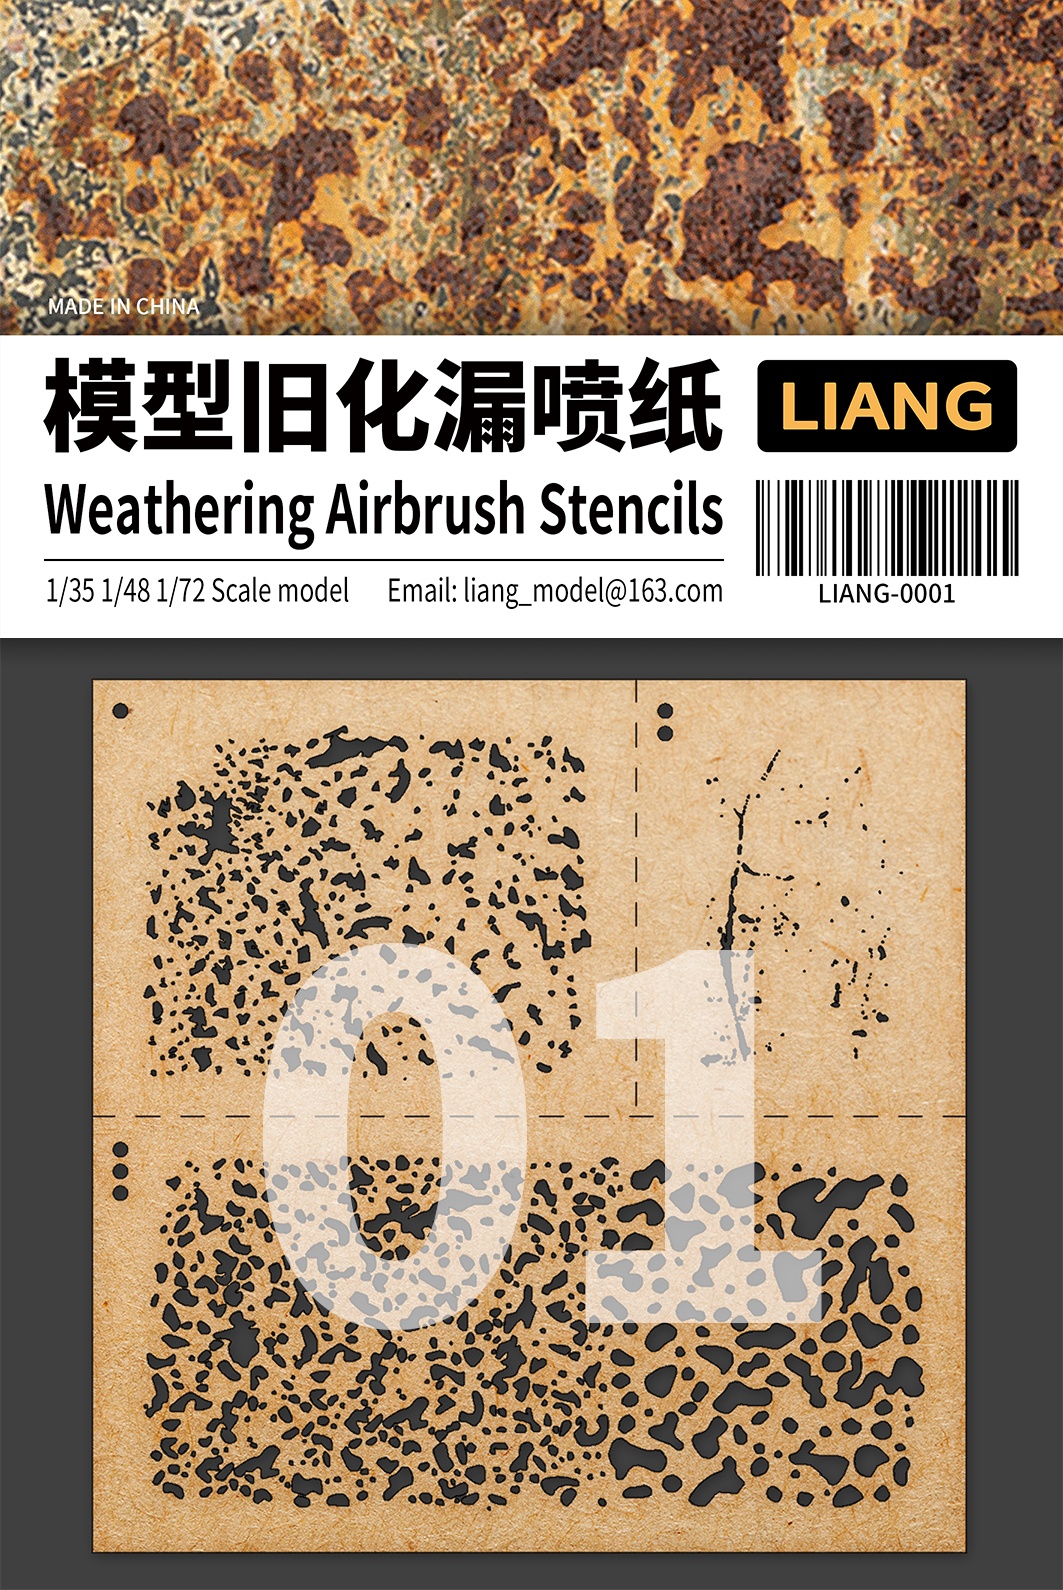 LIANG-0001 Weathering Airbrush Stencils for 1/35 1/48 1/72 Scale Model Gift 